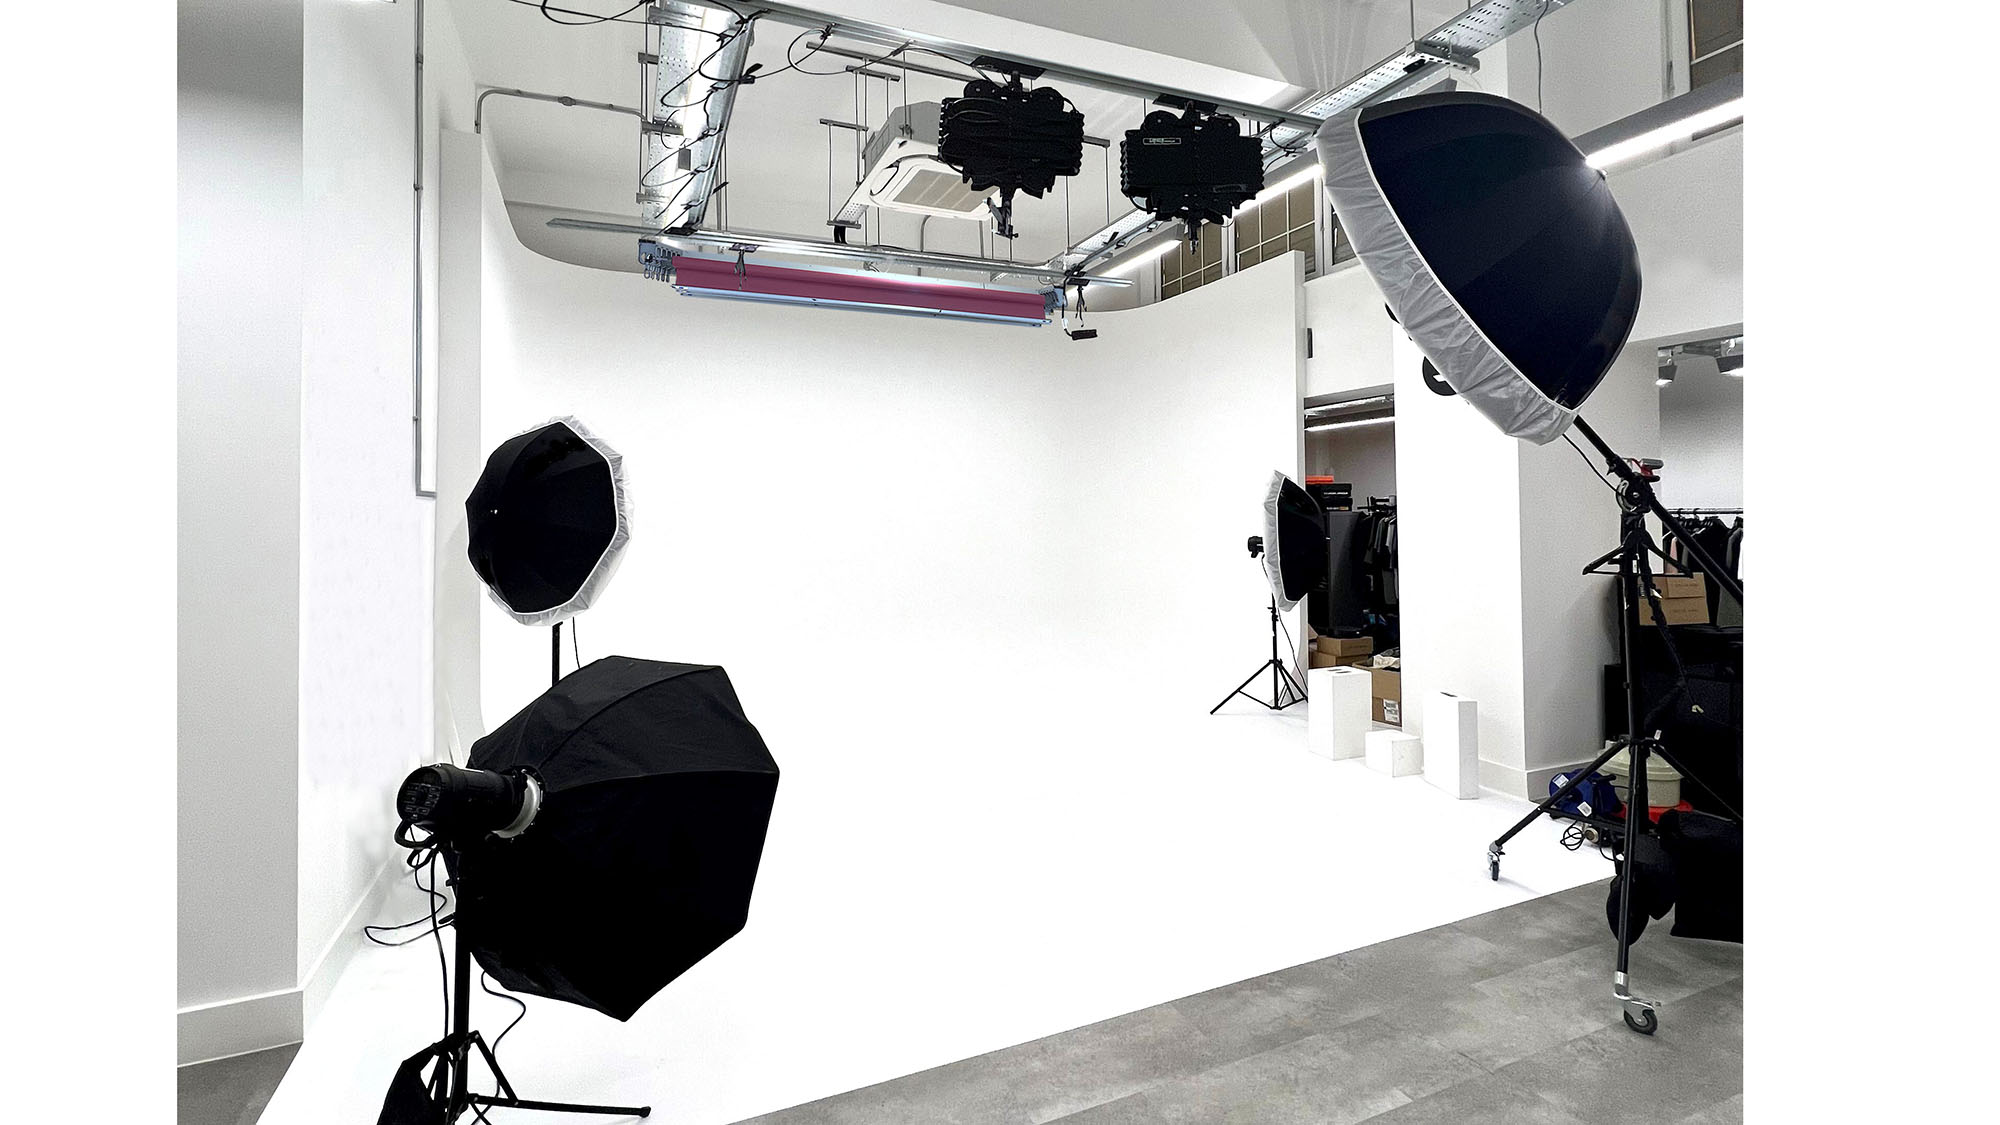 For all your photography studio needs